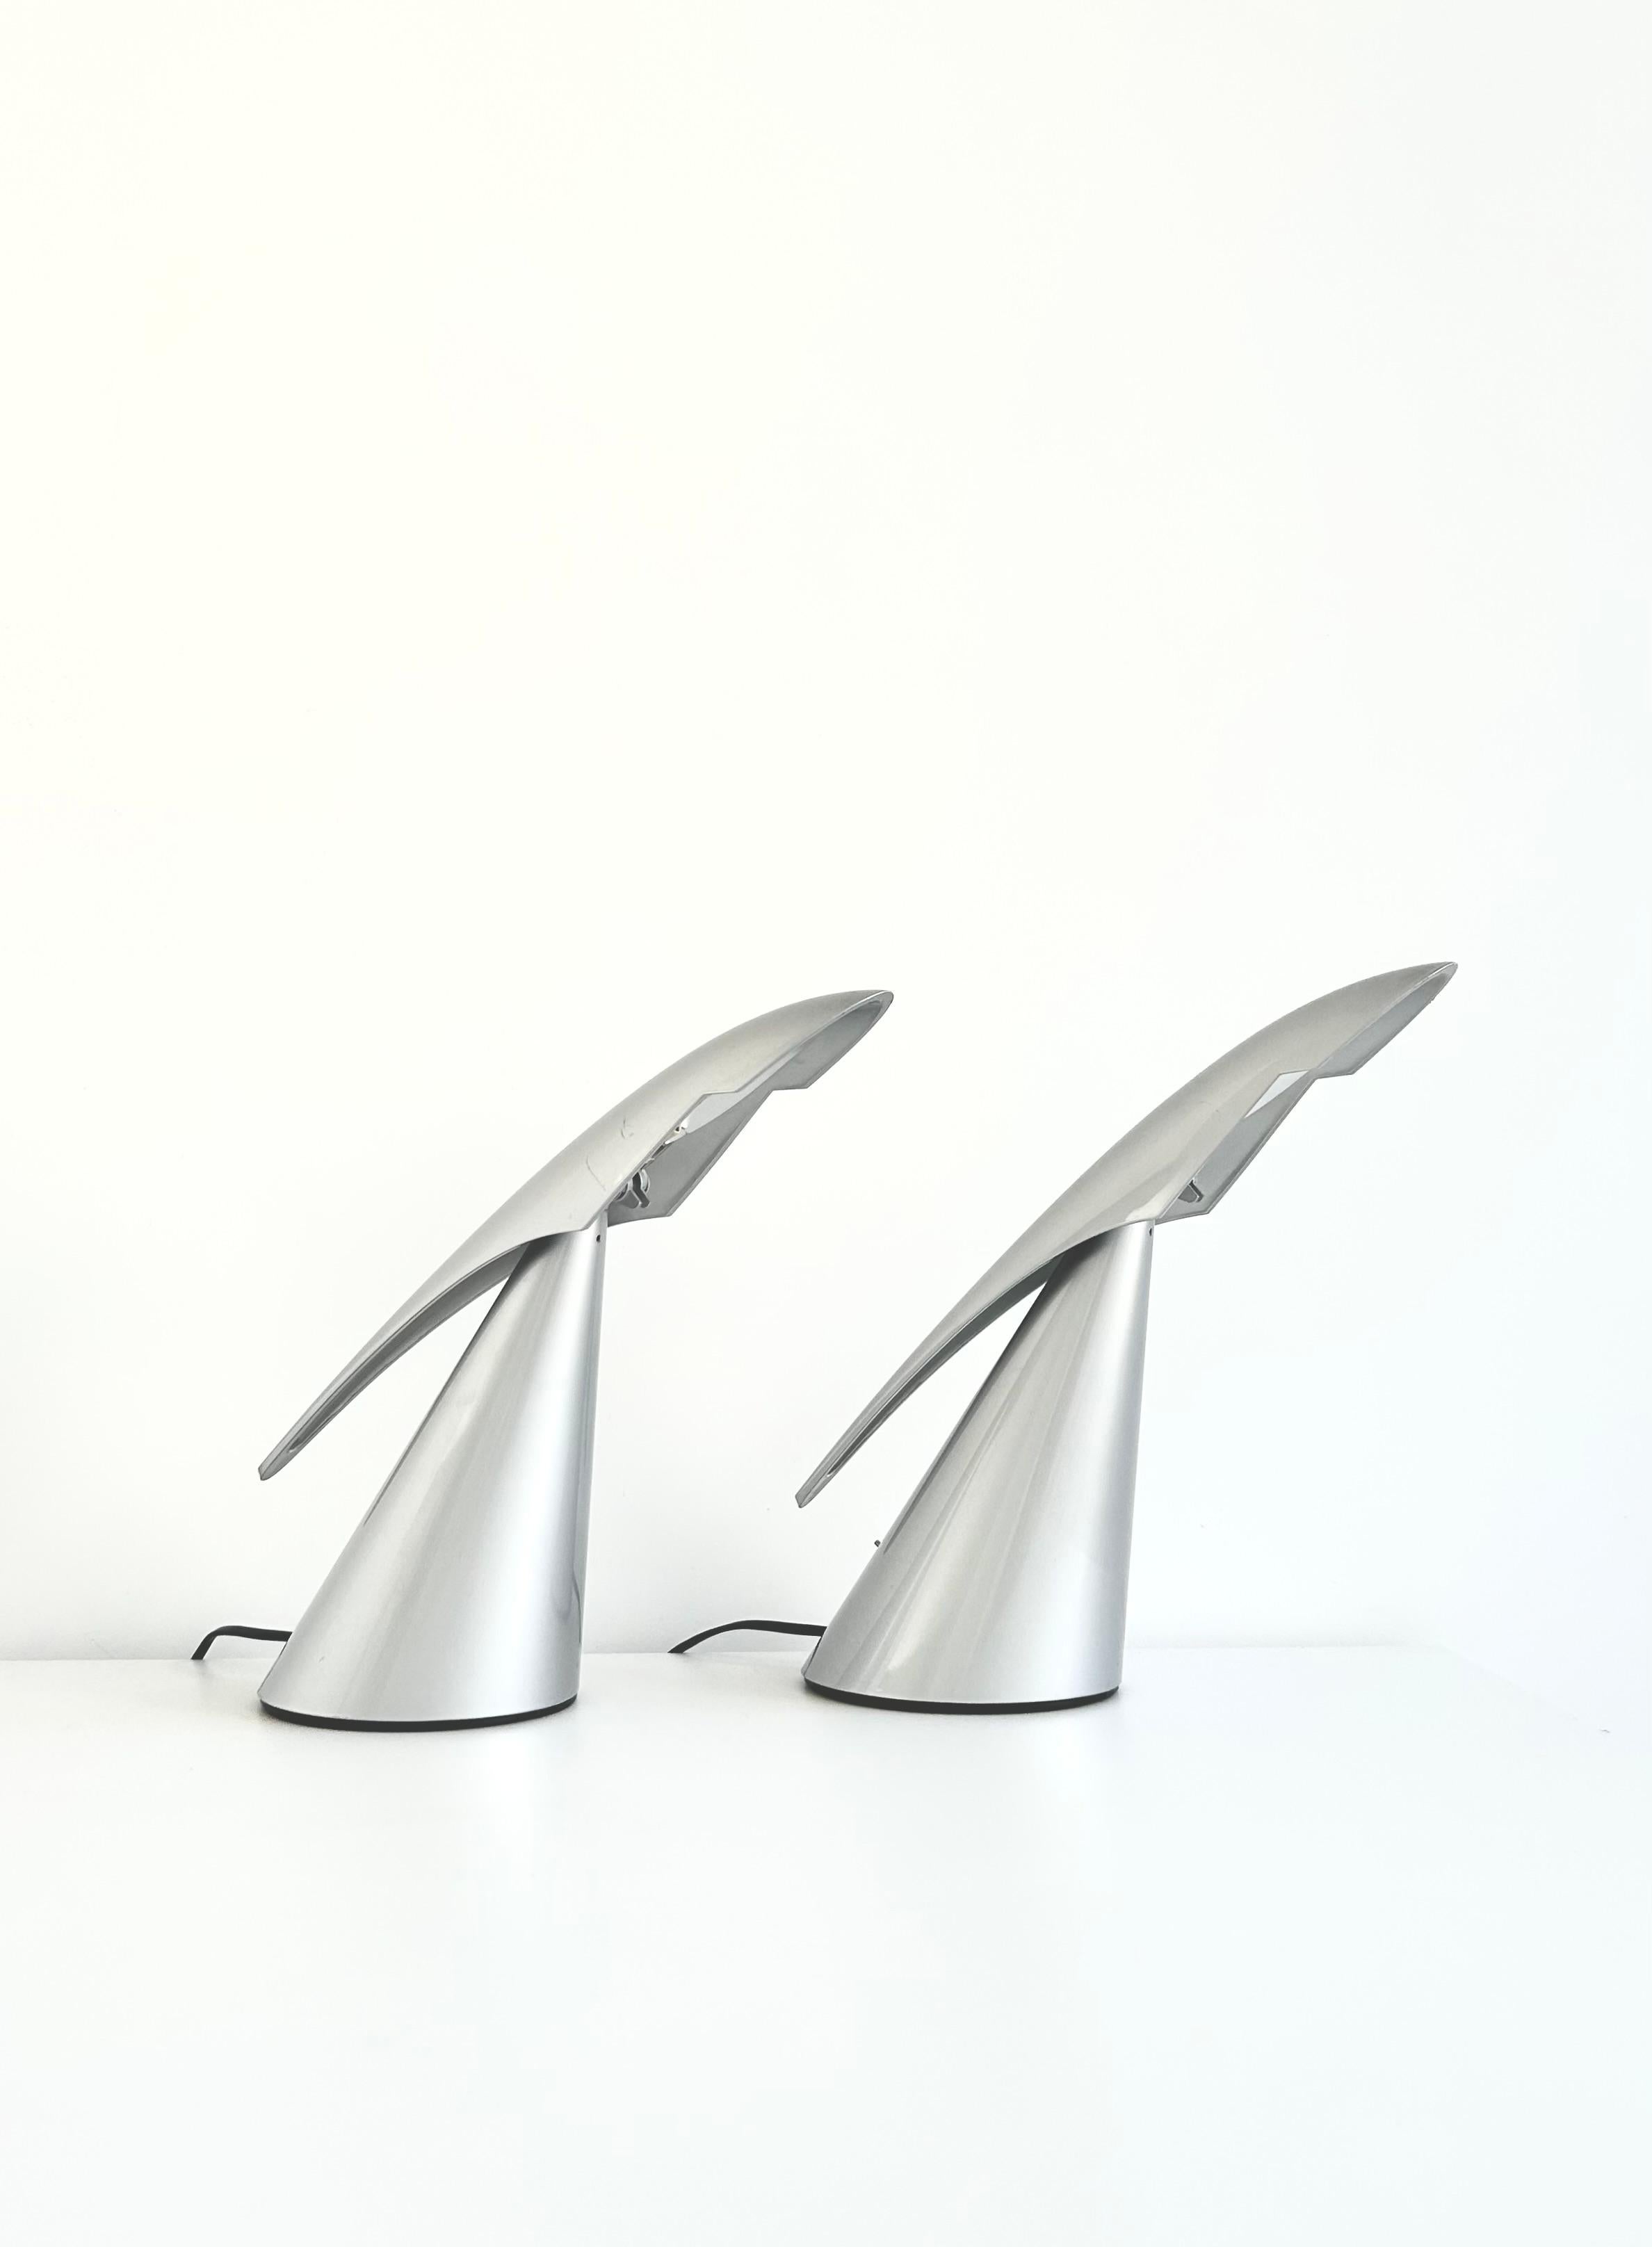 Late 20th Century Pair of Ran Desk Lamps, Peter Naumann, ClassiCon, 1990s For Sale